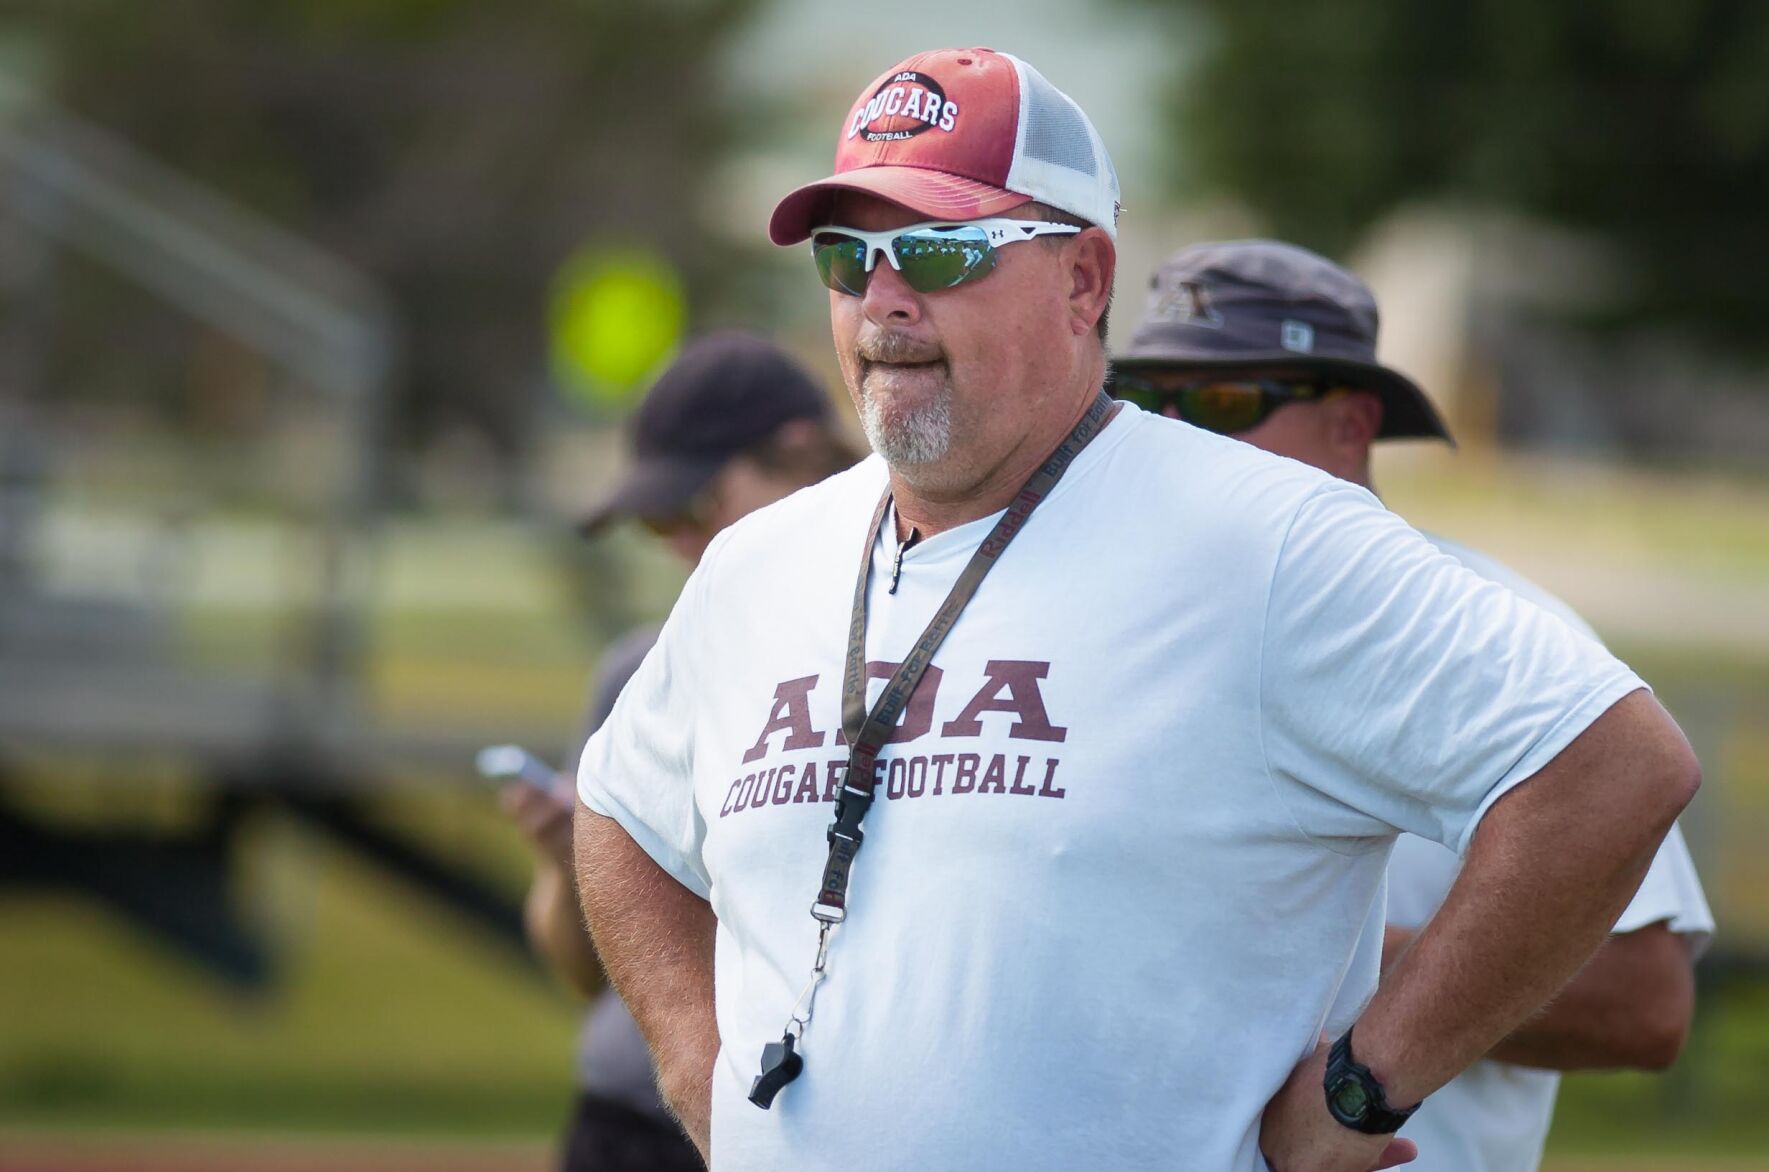 Brad O’Steen Returns to Head Coach Position at Wynnewood High School After Successful Stint at Ada